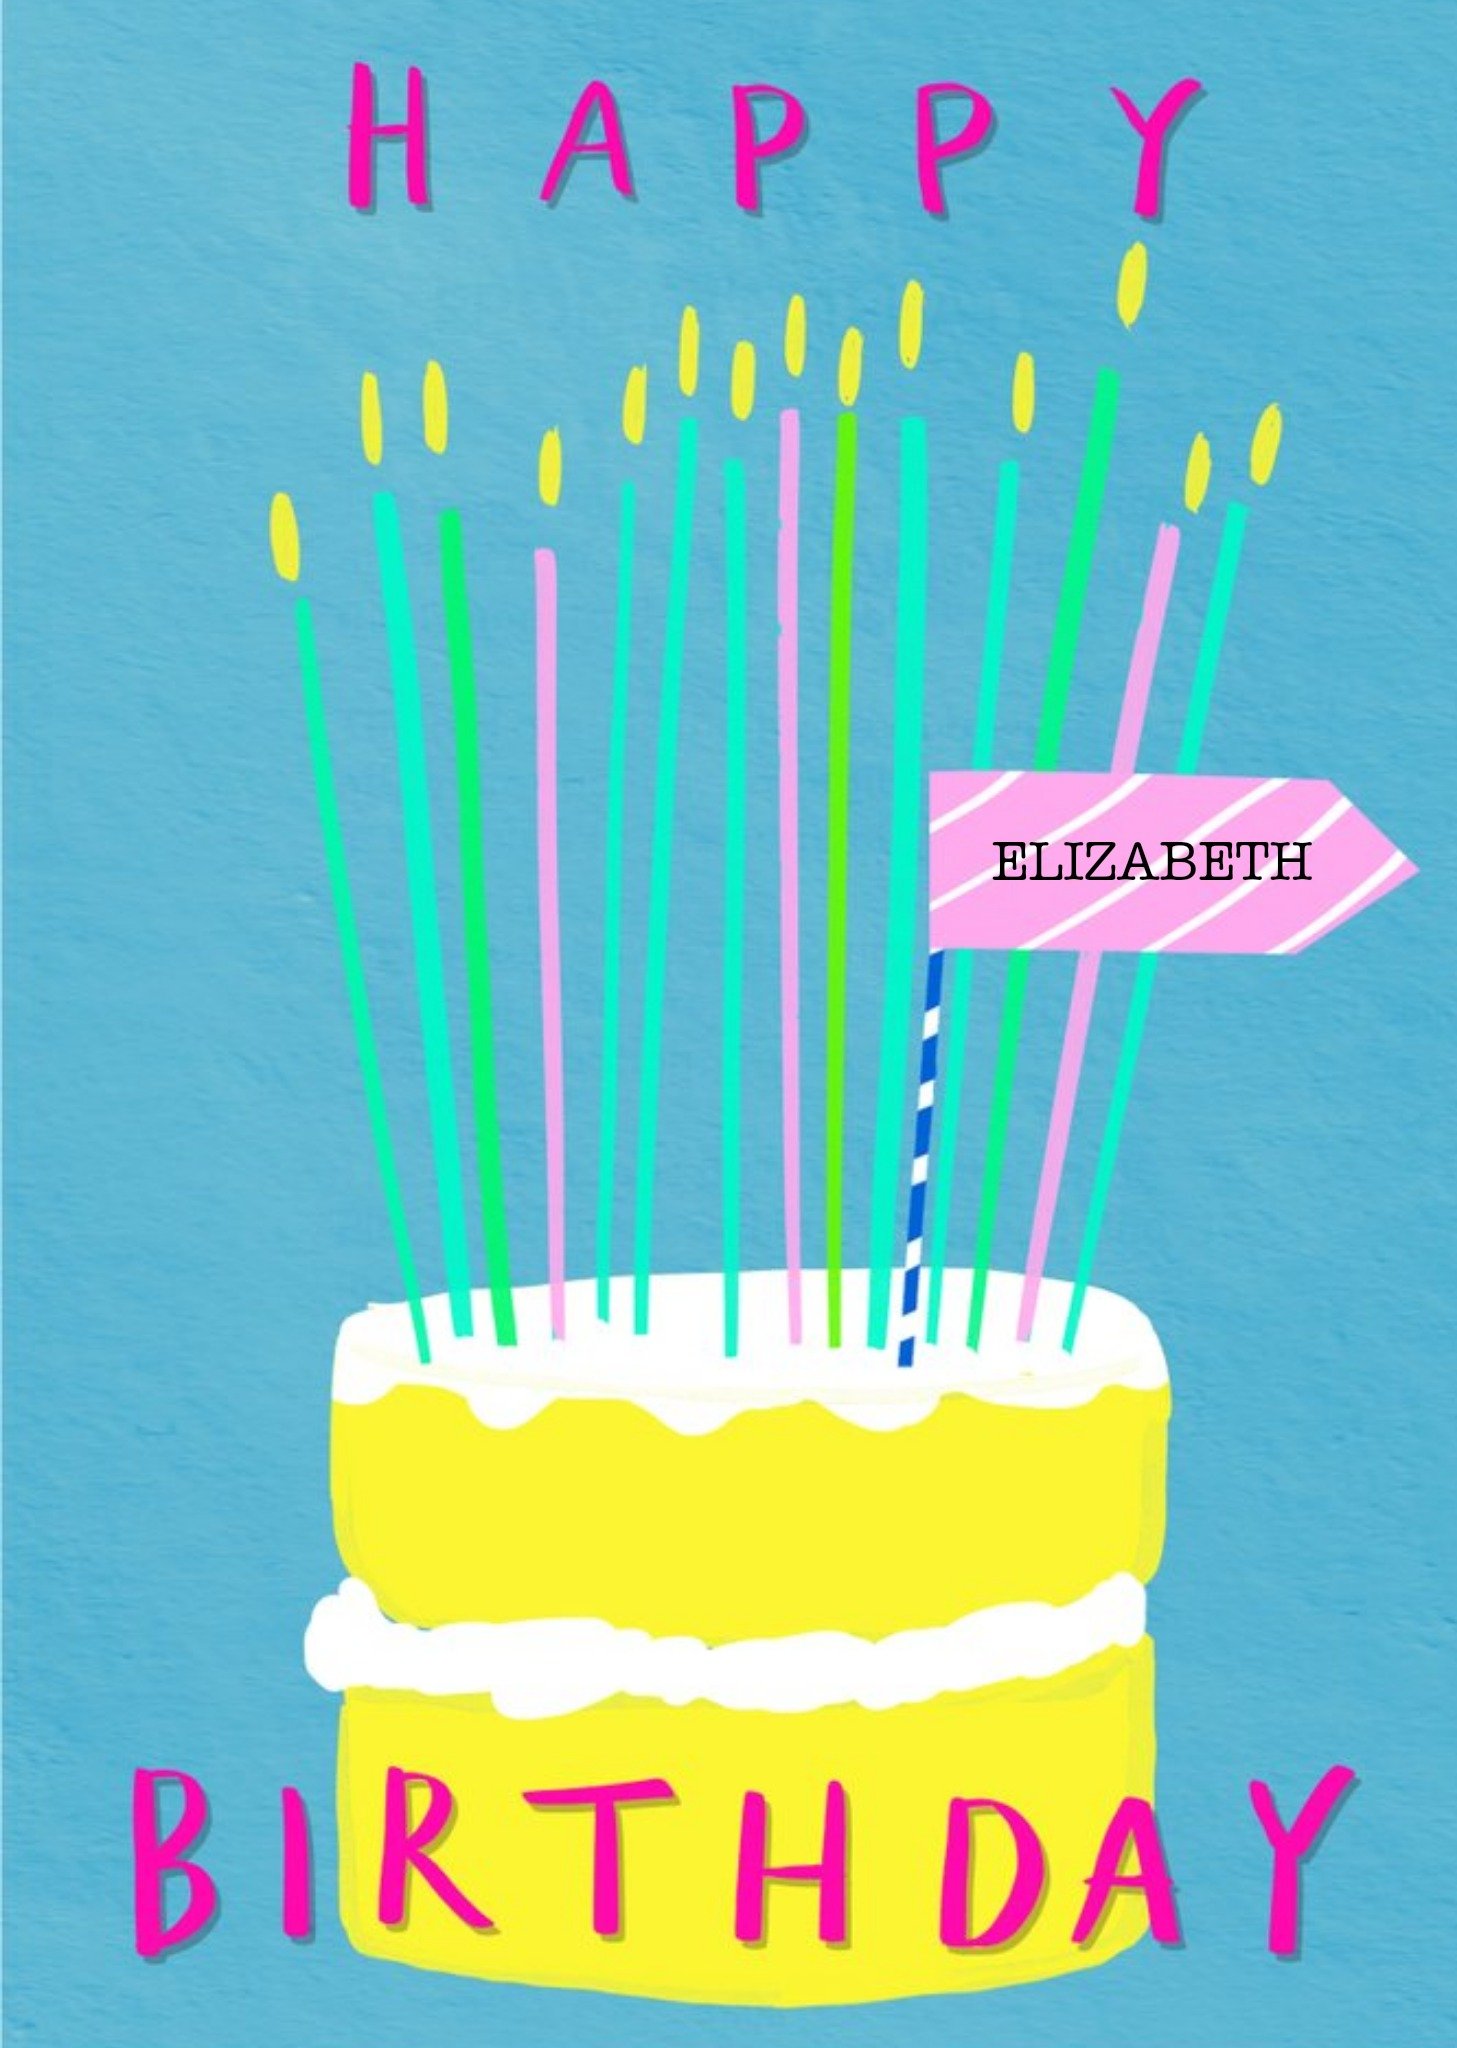 Moonpig Fun Food Illustration Birthday Cake With Many Candles Card By Elaine Field Ecard